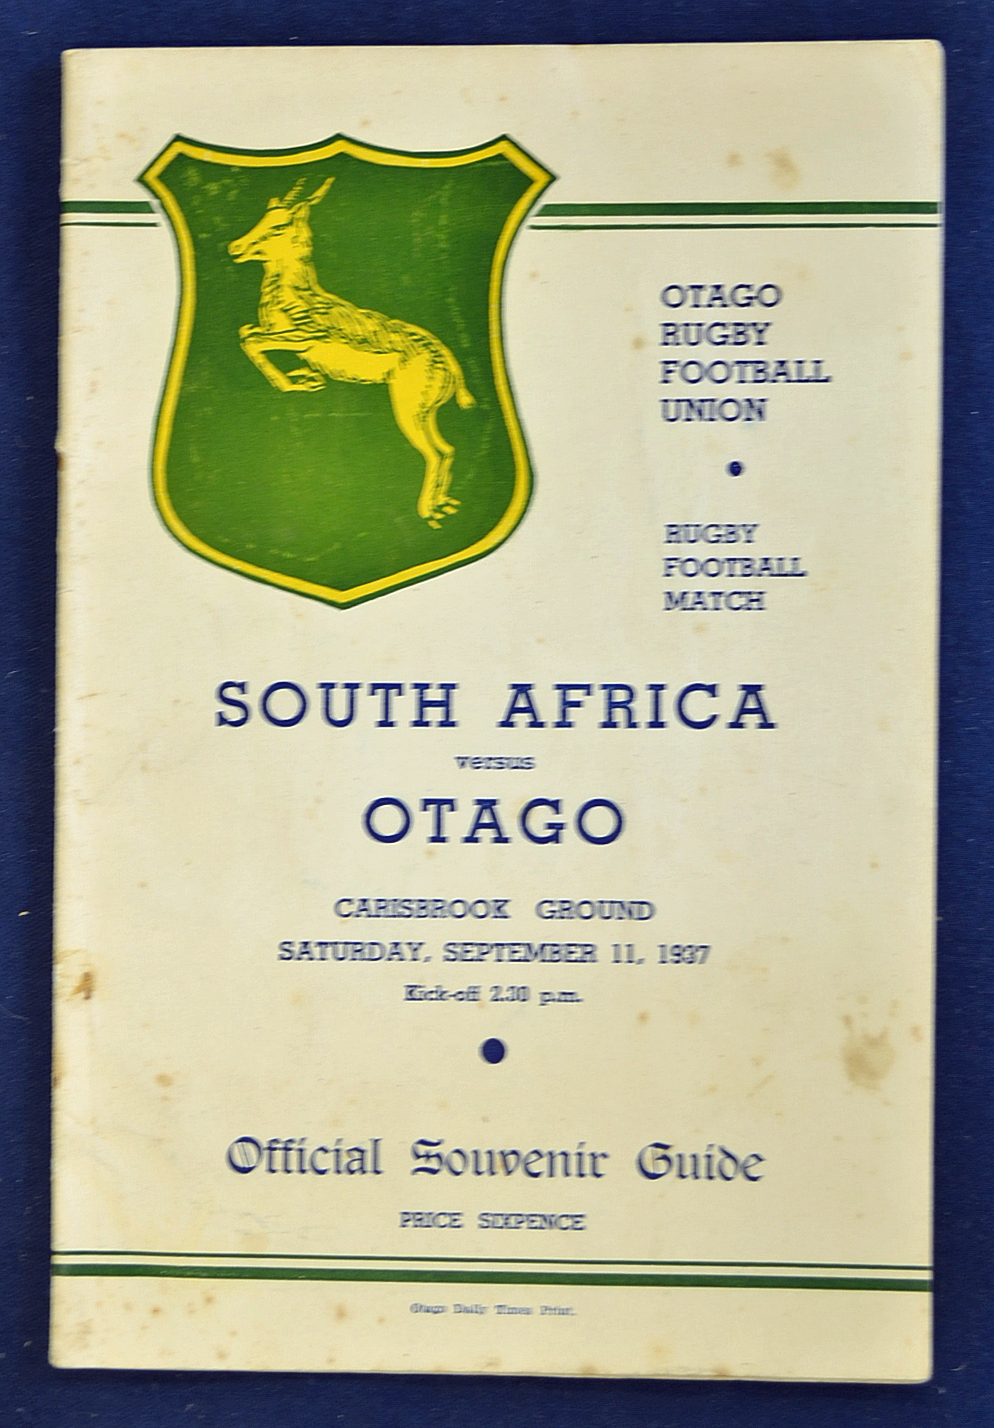 1937 South Africa v Otago rugby programme - played at Carisbrook Ground on Saturday 11th September